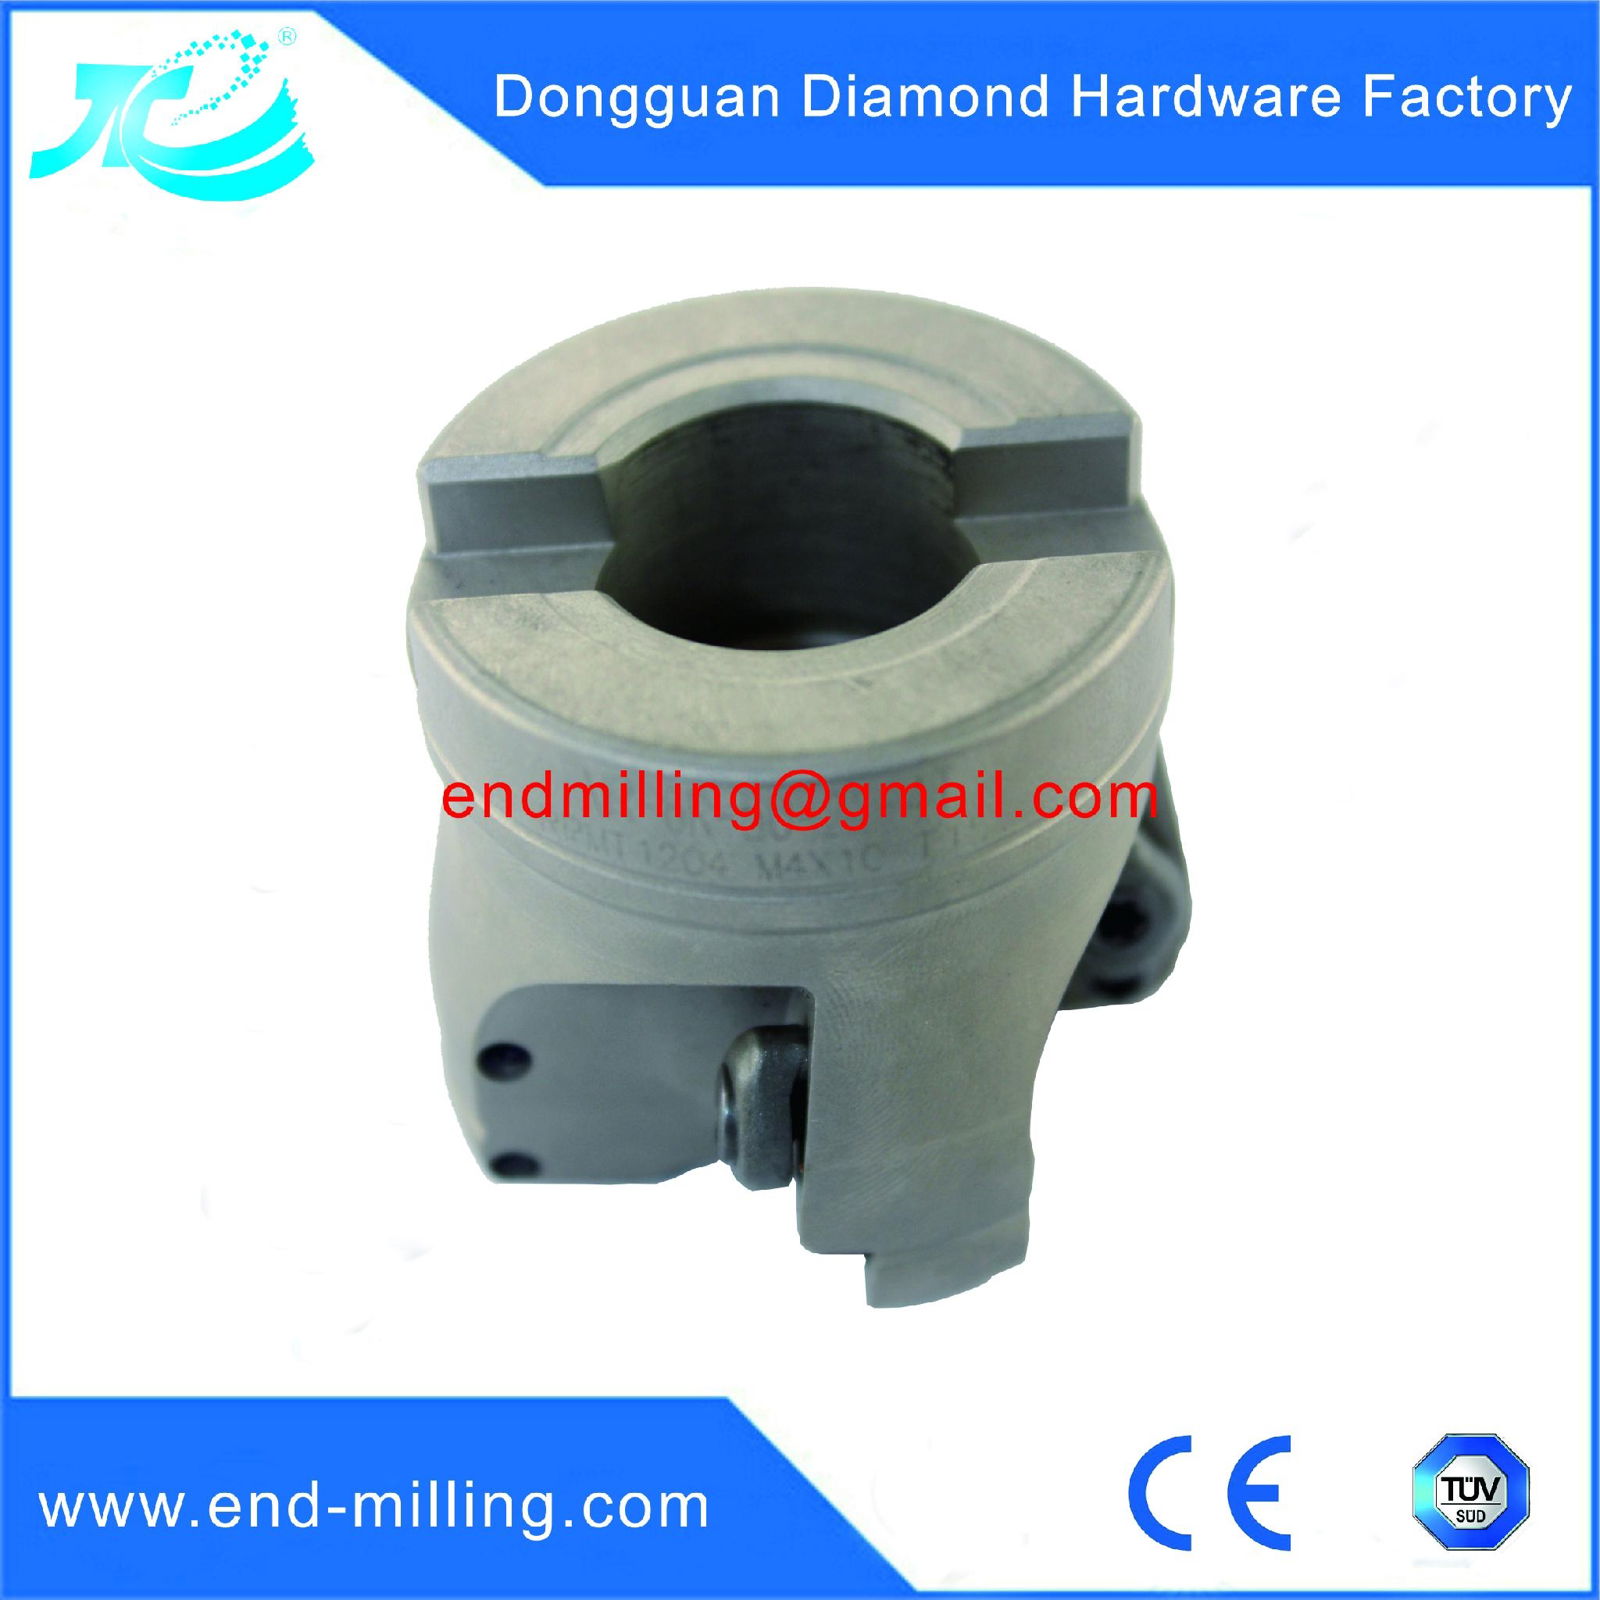 Face Milling Tool EMR Round Dowel Face Mill